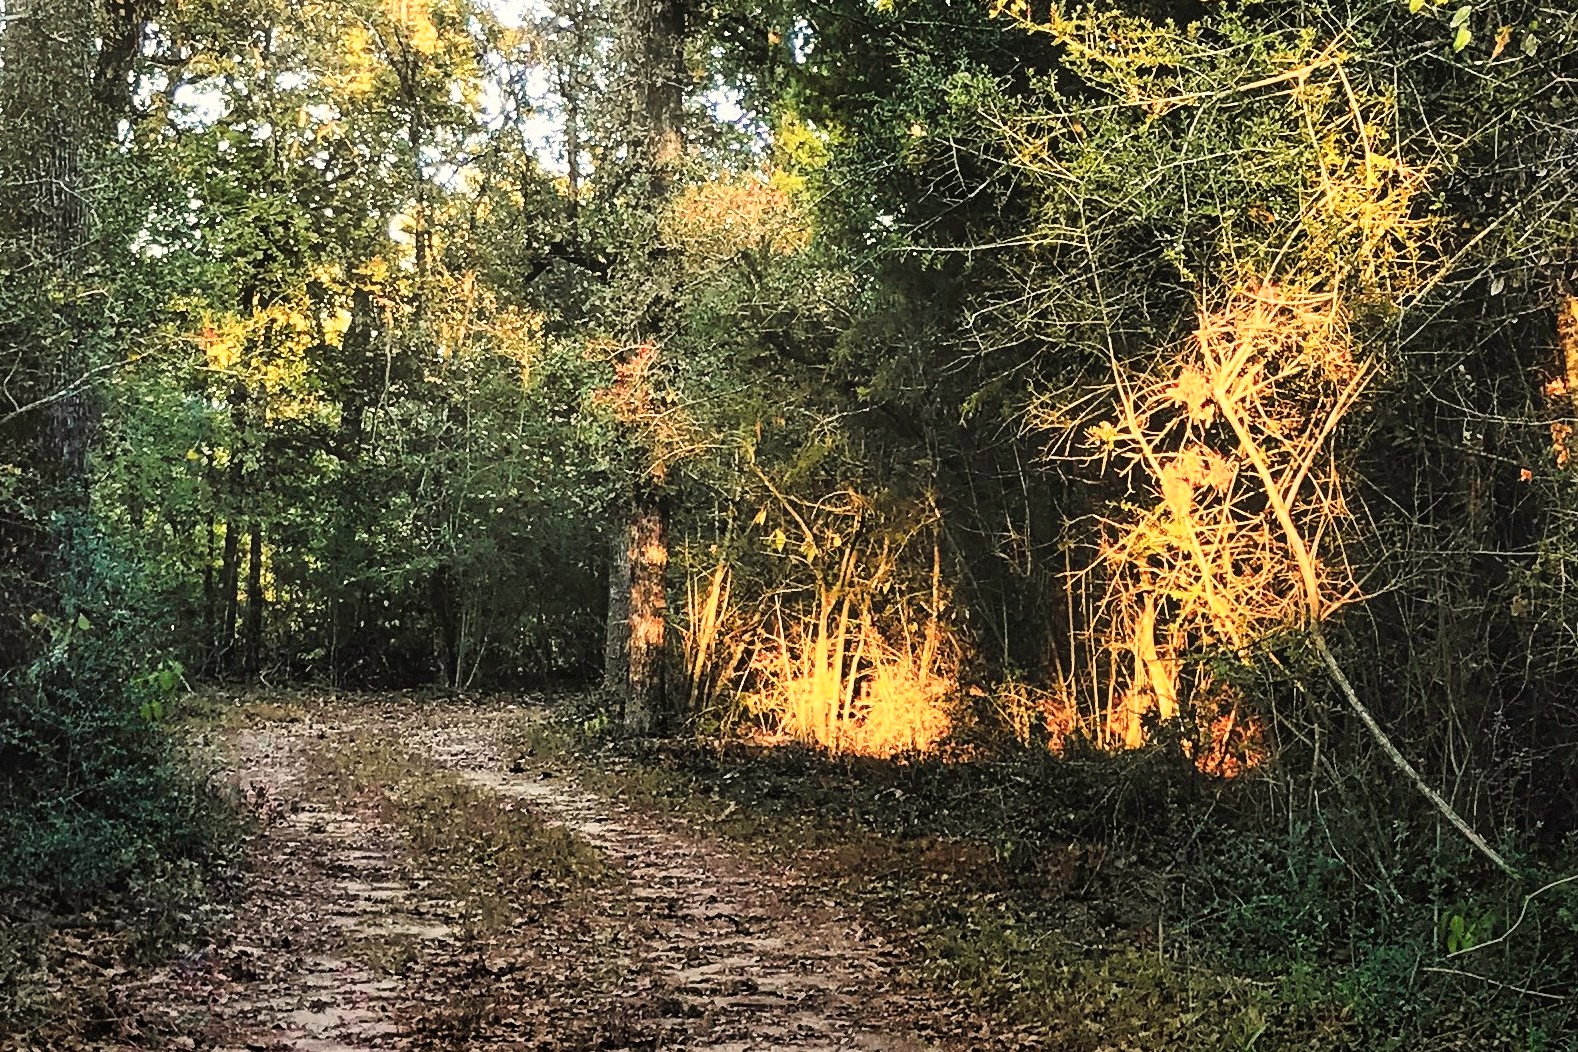 A dirt road into the woods with trees on either side; the sun casts a yellow spotlight on the trunks of the trees on the right side of the road